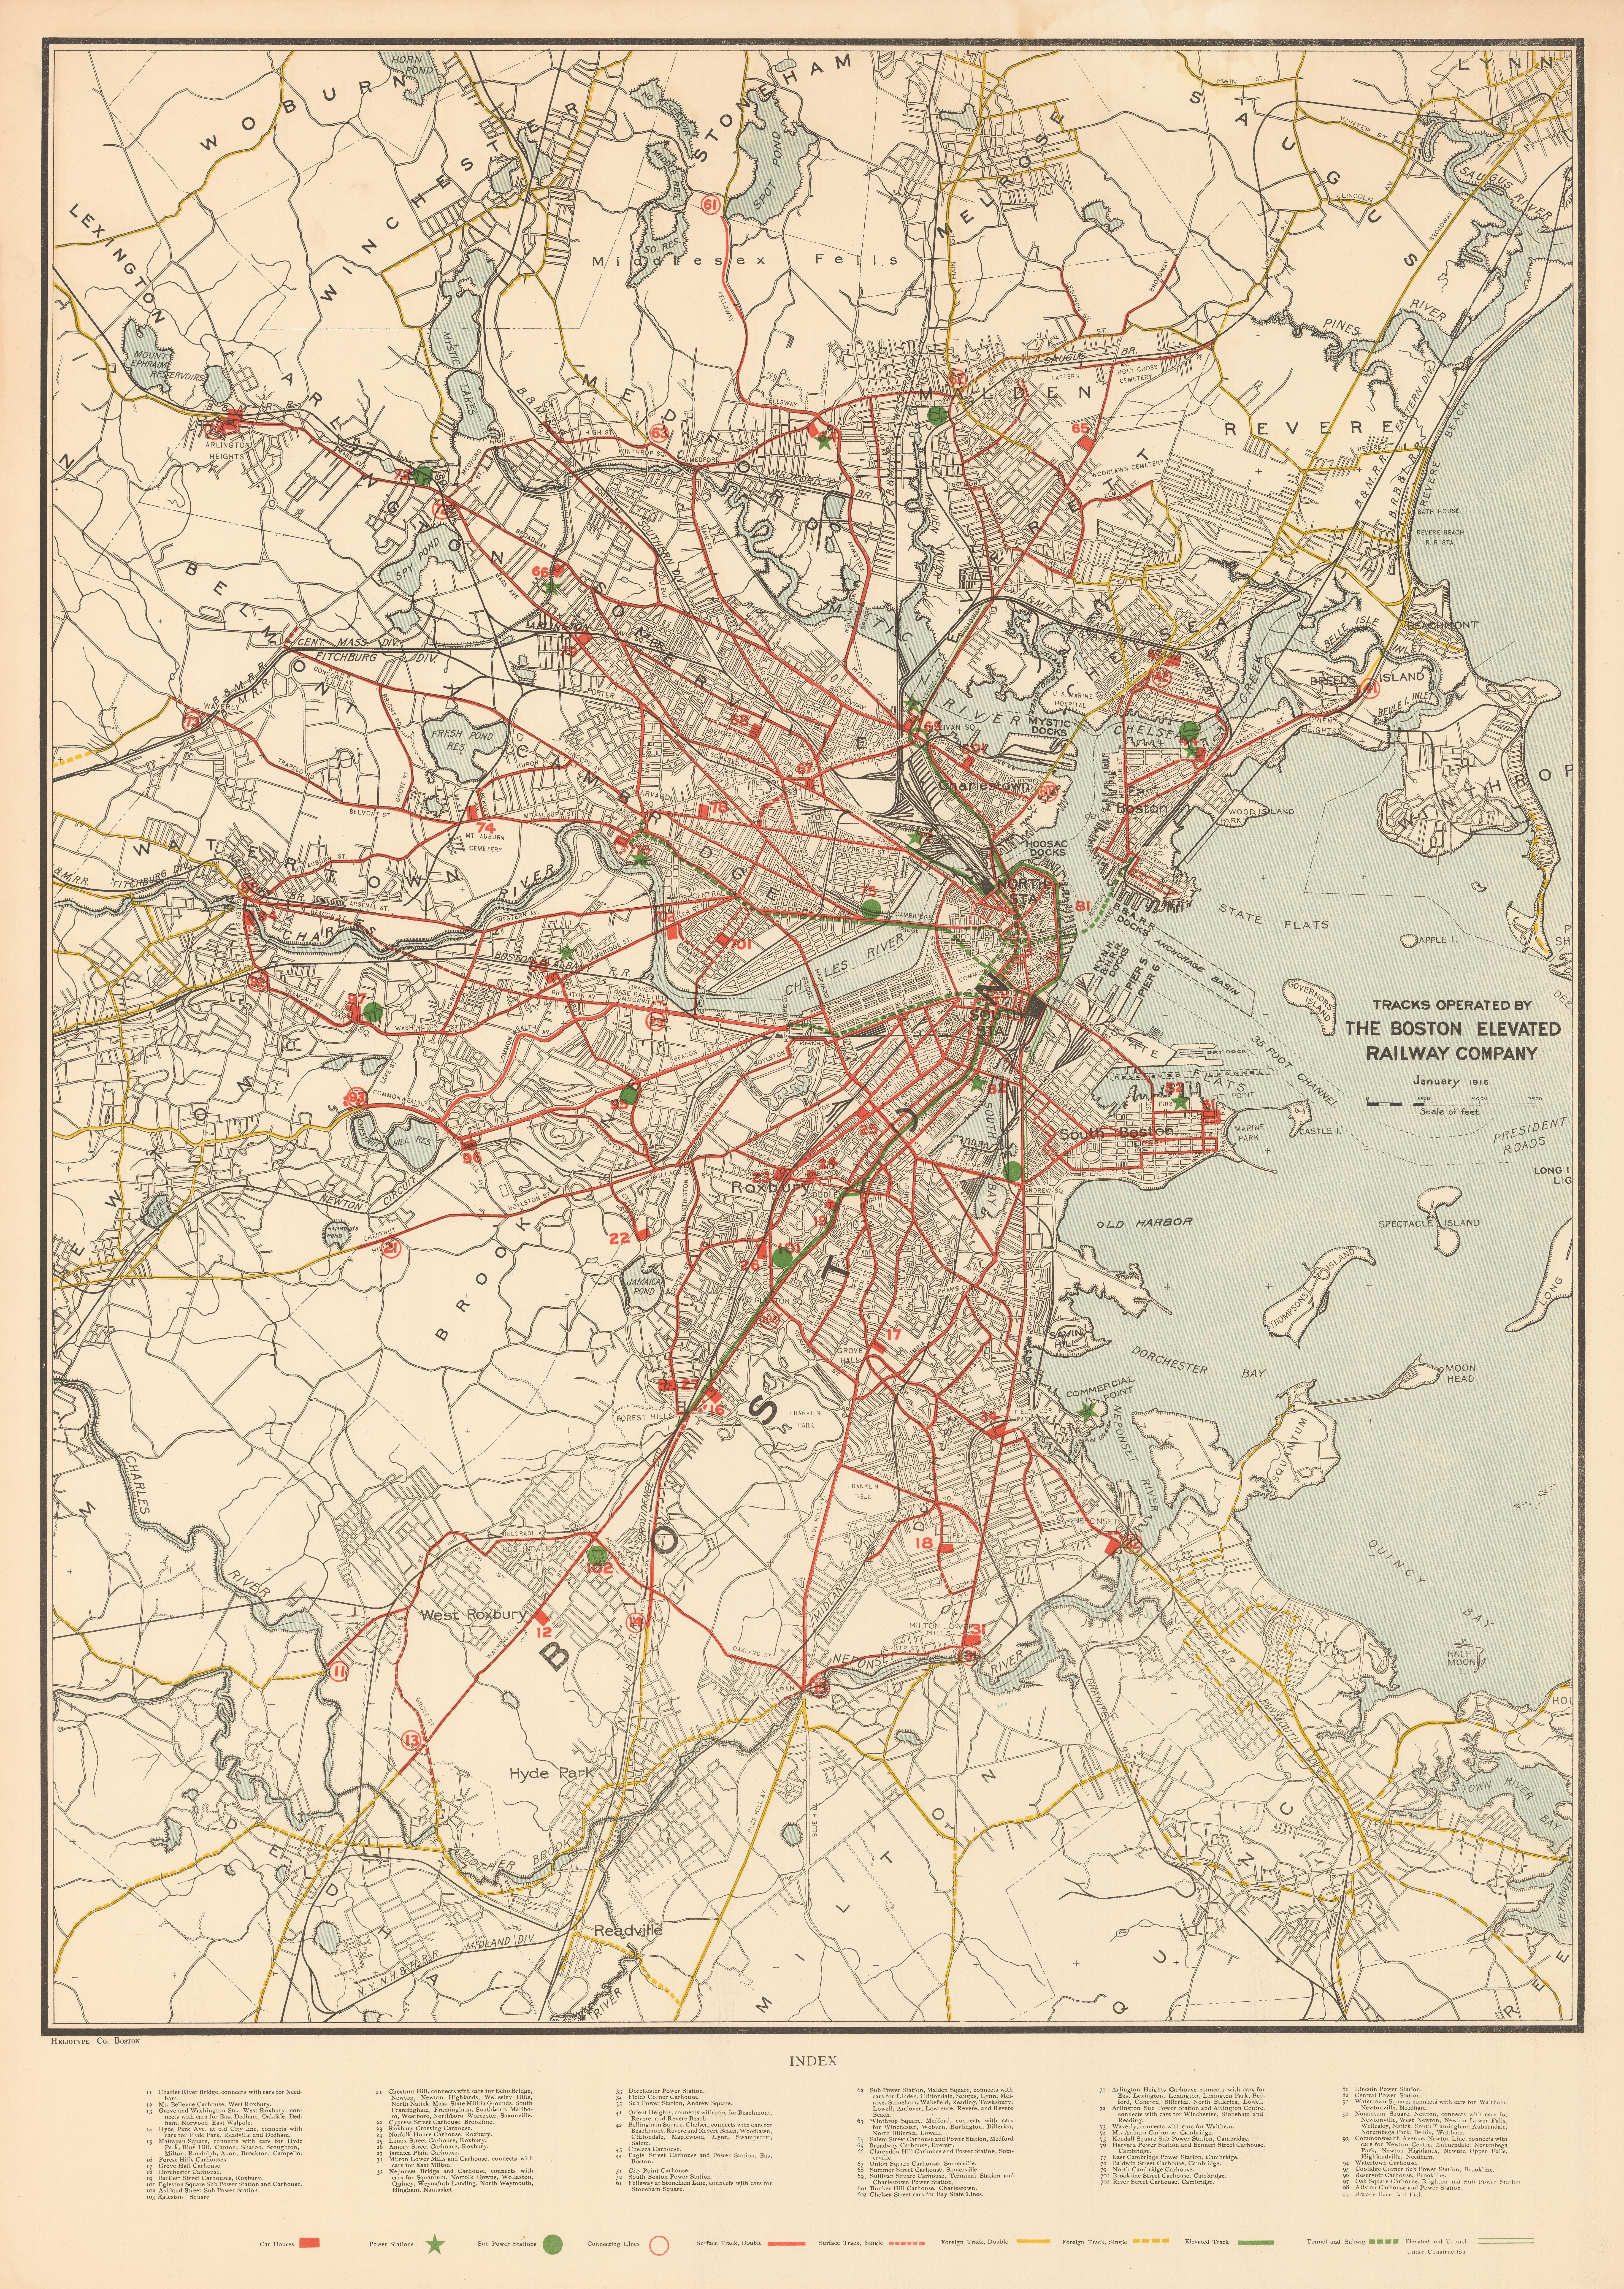 Image of Tracks Operated by the Boston Railway Company